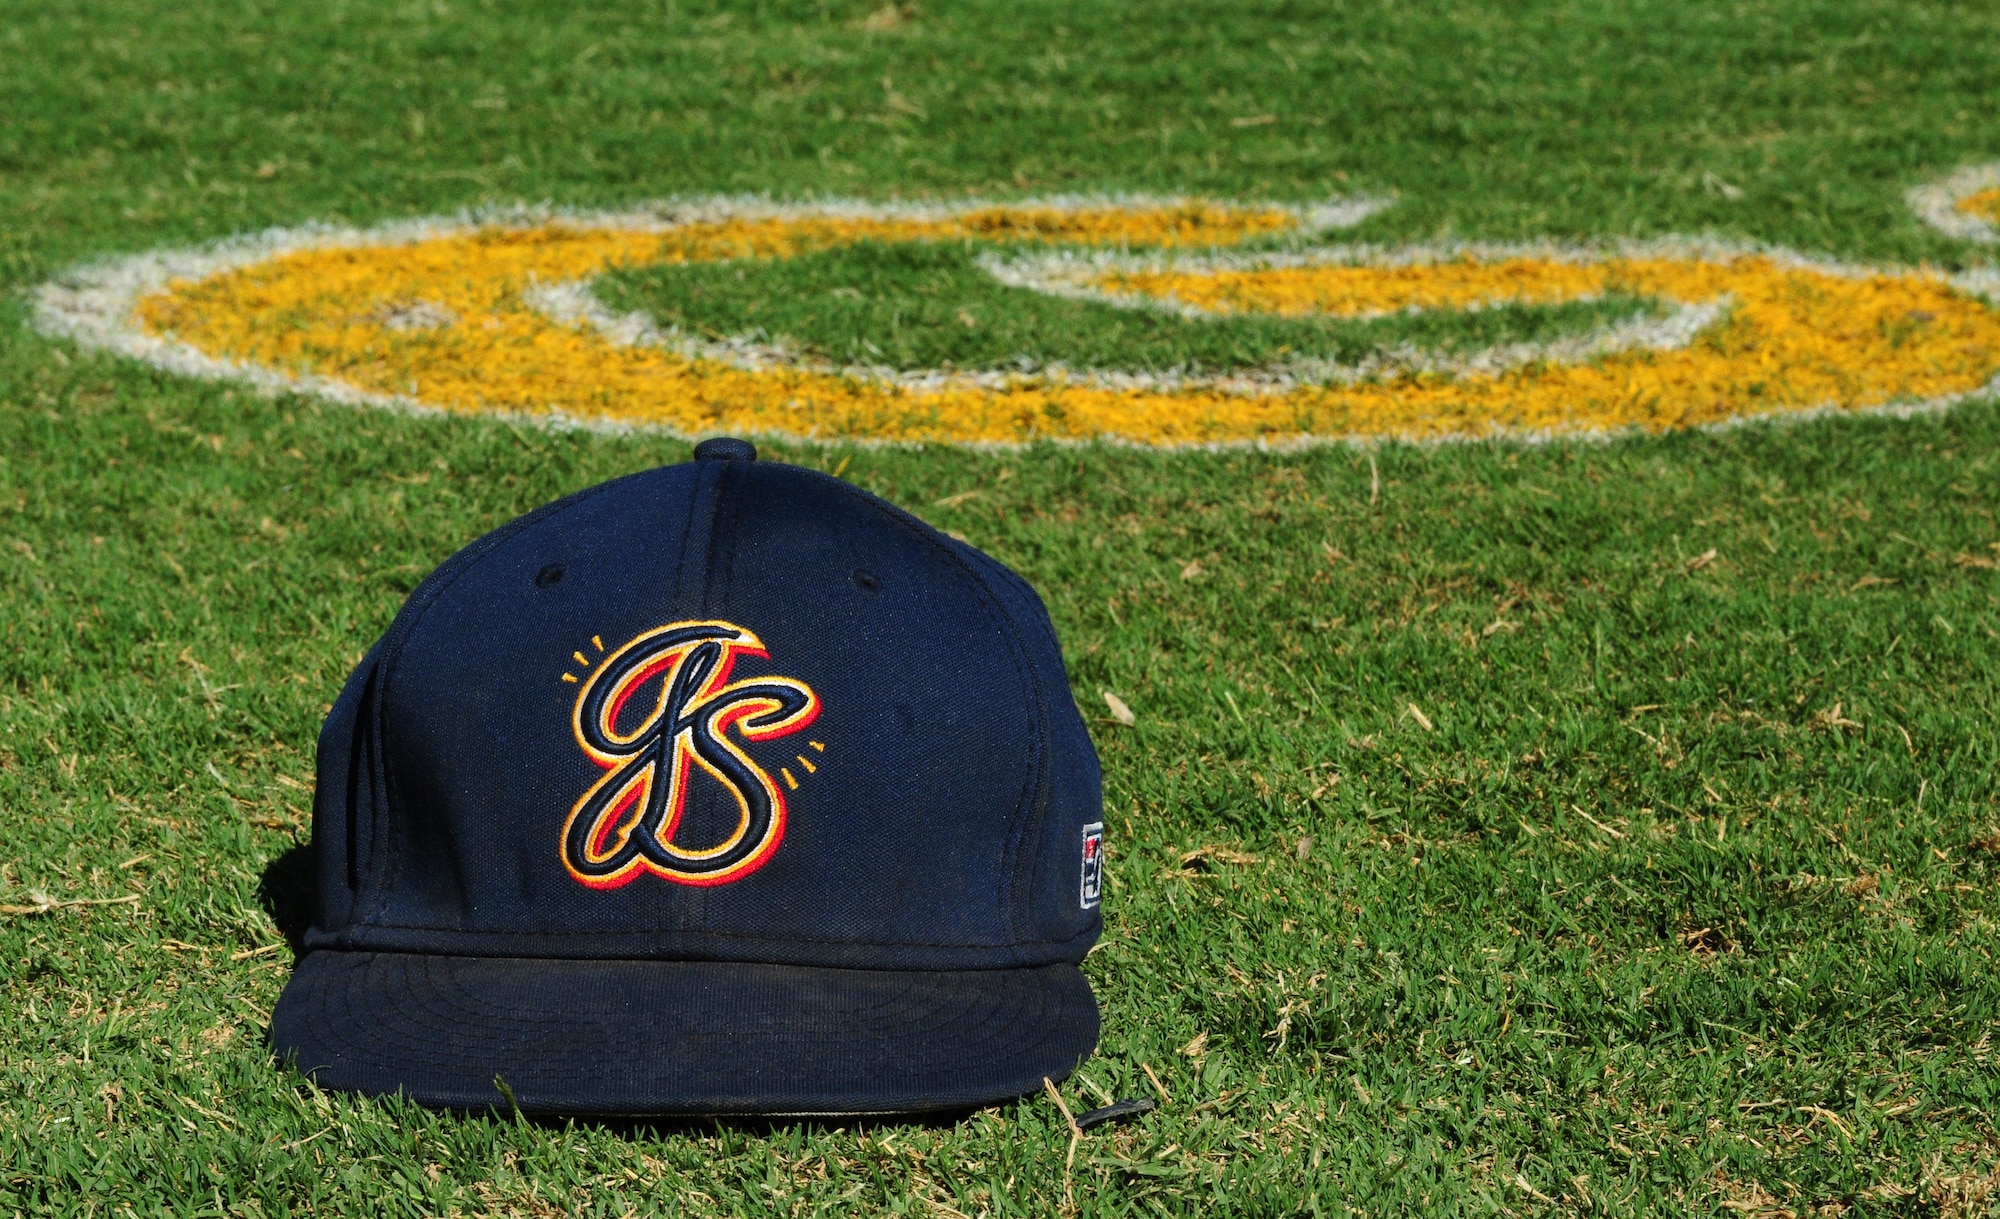 Marysville Goldsox hat sits on Appeal-Democrat Field during pregame warm-ups July 5 in Marysville, Calif. The Goldsox defeated the California Glory of Lodi, Calif. 8-3. (U.S. Air Force photo by Senior Airman Allen Pollard)